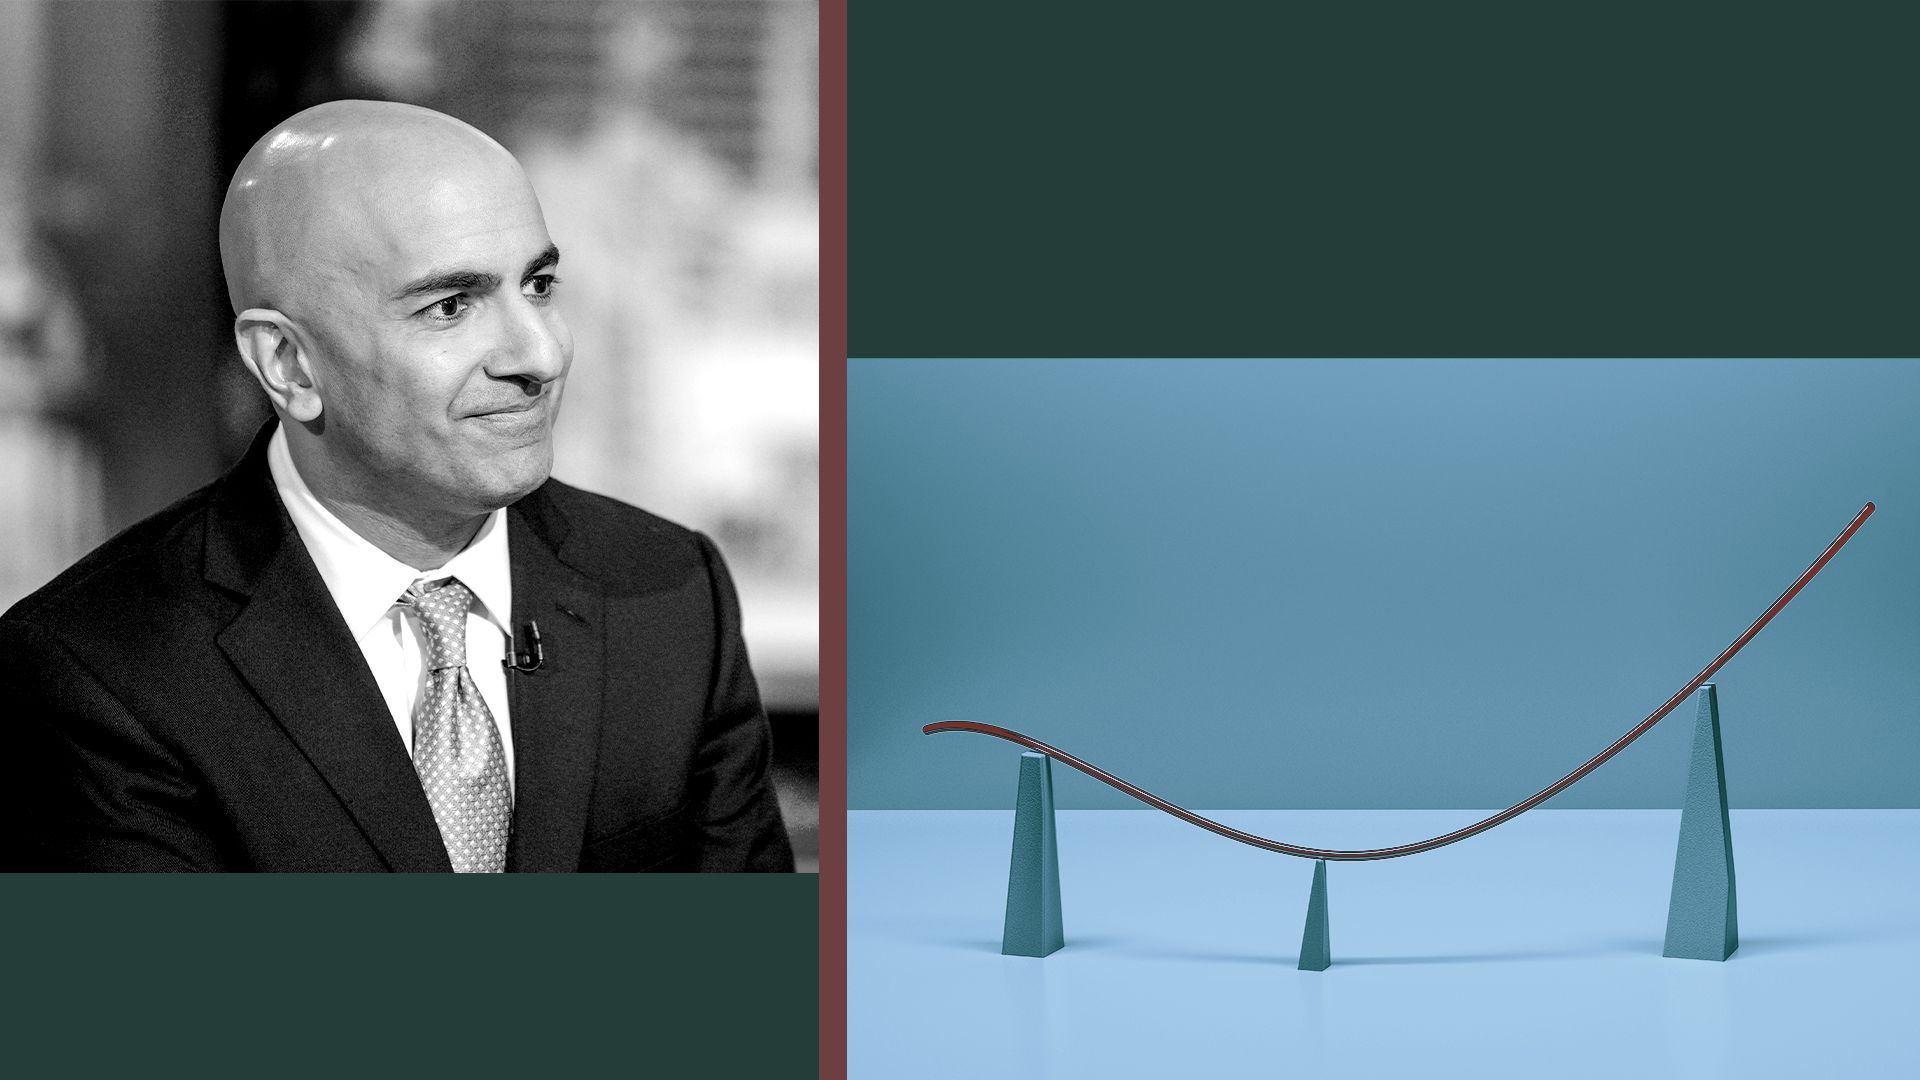 Photo illustration of Neel Kashkari, the Minneapolis Fed president, next to graphic shapes and an abstracted trend line.